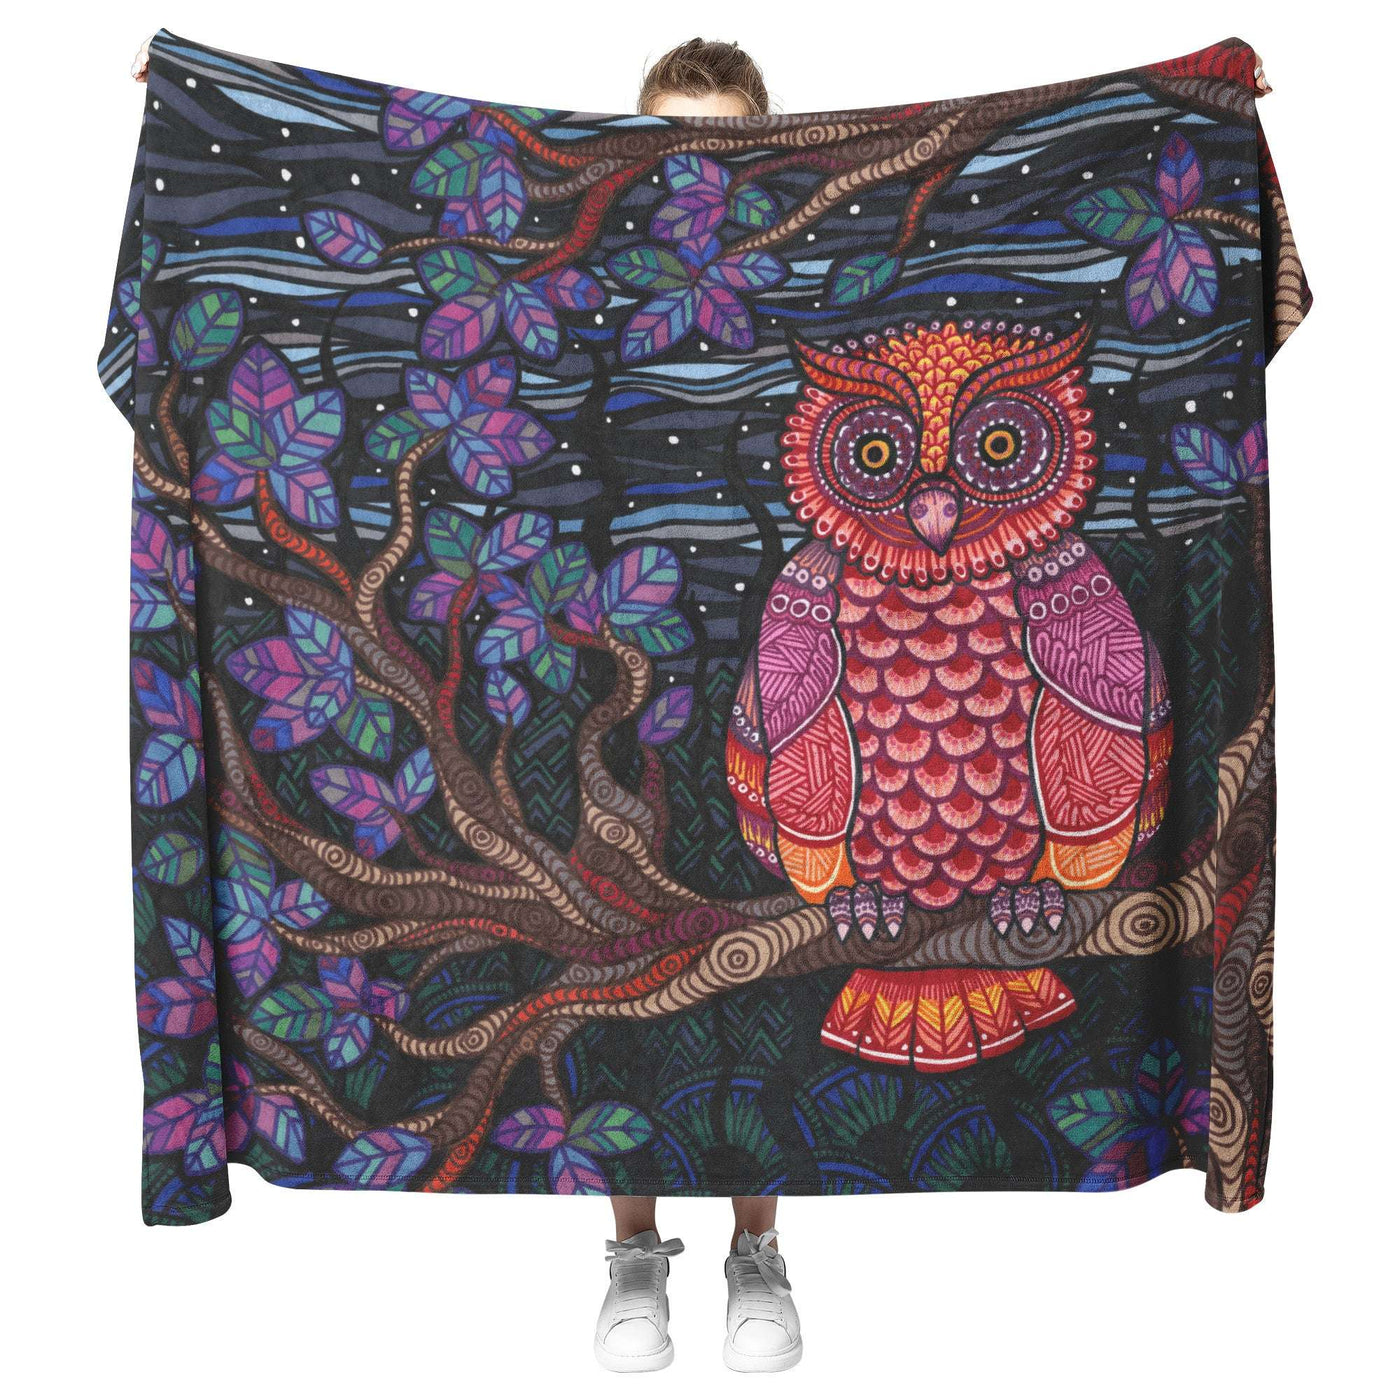 A person holding up a large, colorful Owl Tree Blanket featuring a detailed illustration of an owl on a tree branch with a starry night background.